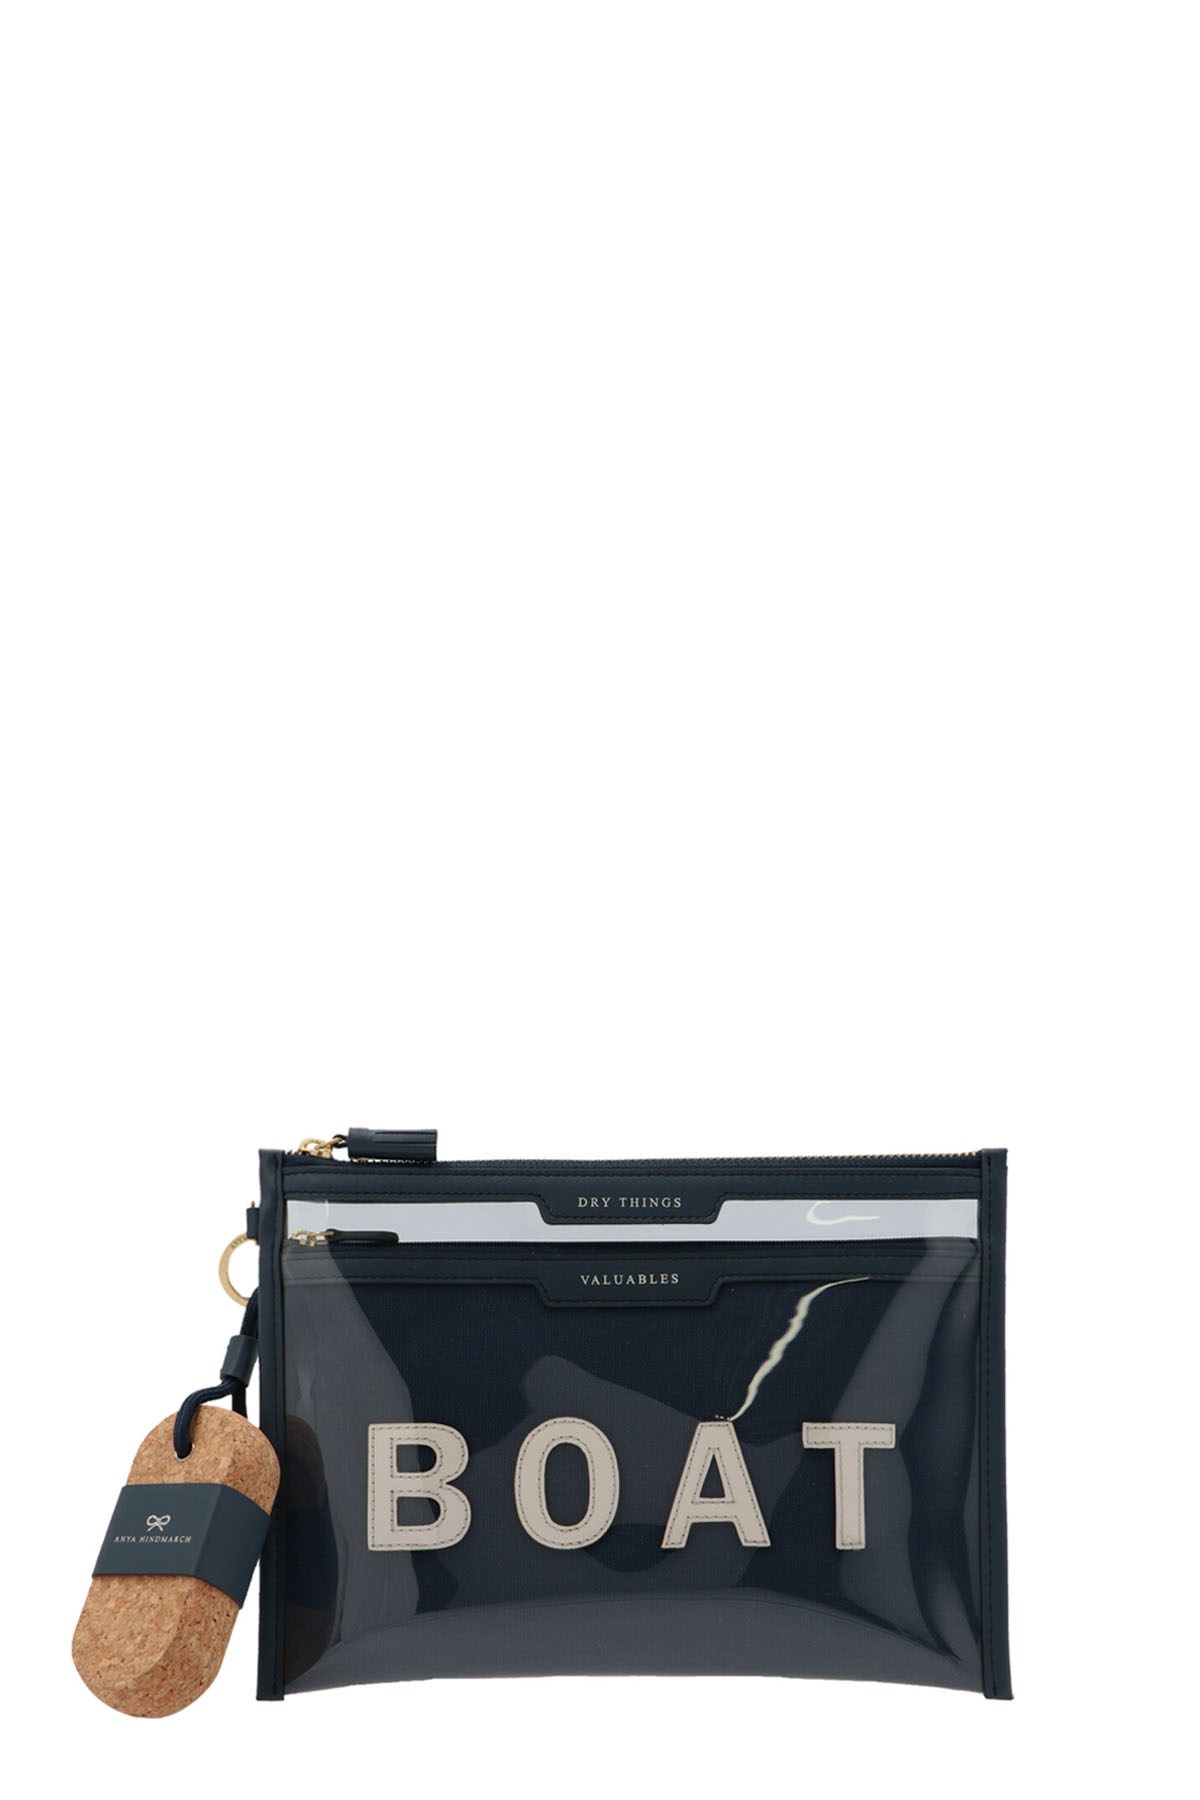 ANYA HINDMARCH Unterarmtasche 'Dry Things Boat'